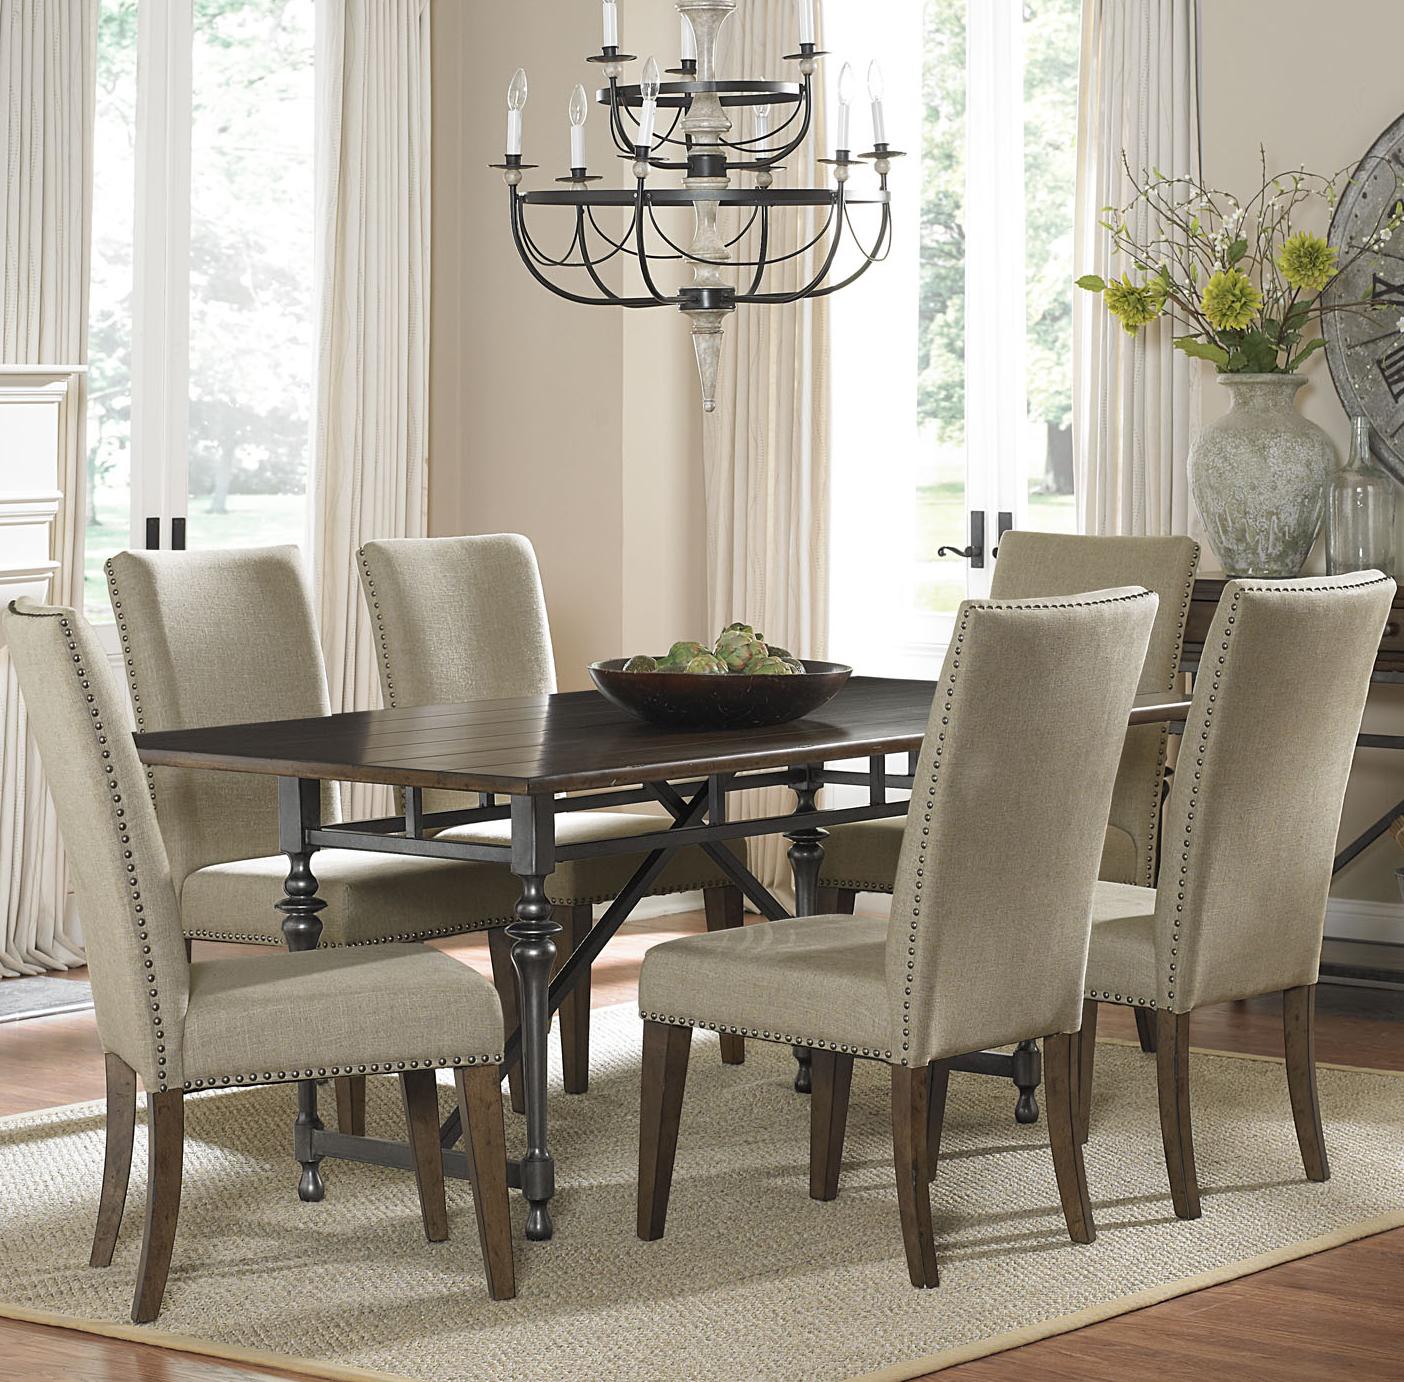 Amazing Stunning Dining Room Sets With Upholstered Chairs 49 About Remodel Small dining room sets with upholstered chairs